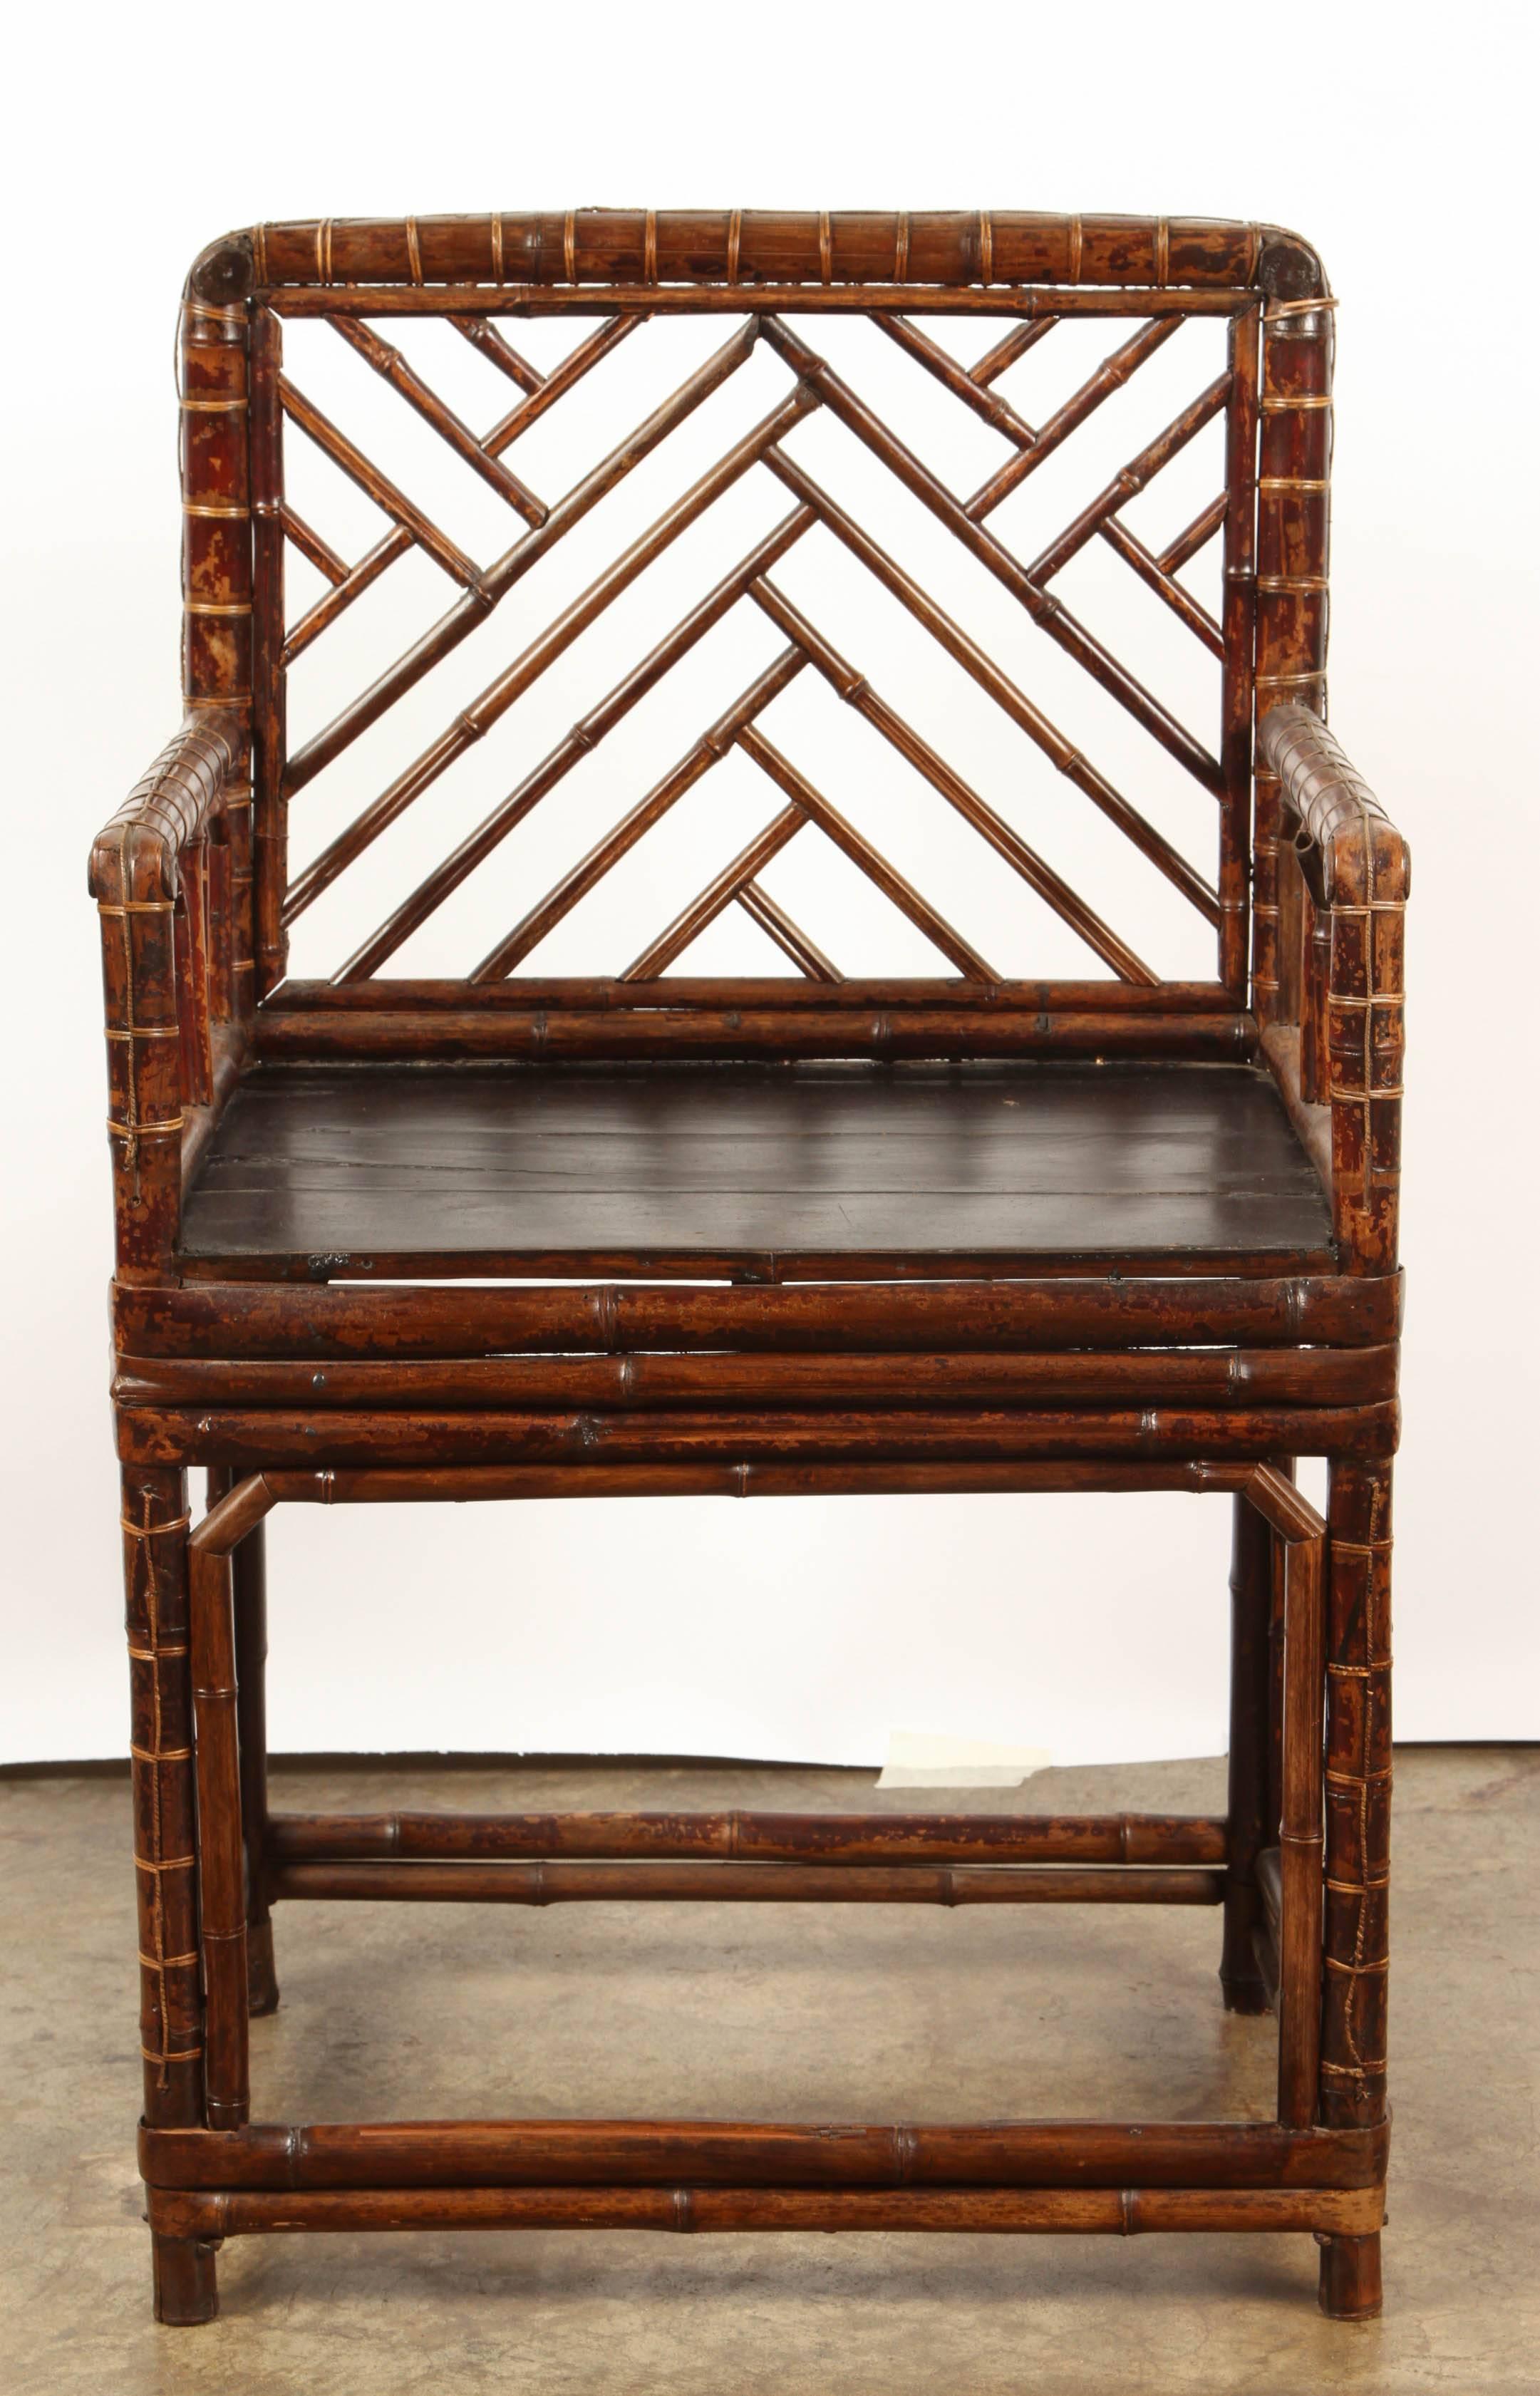 19th Century Chinese bamboo chair with a black seat.